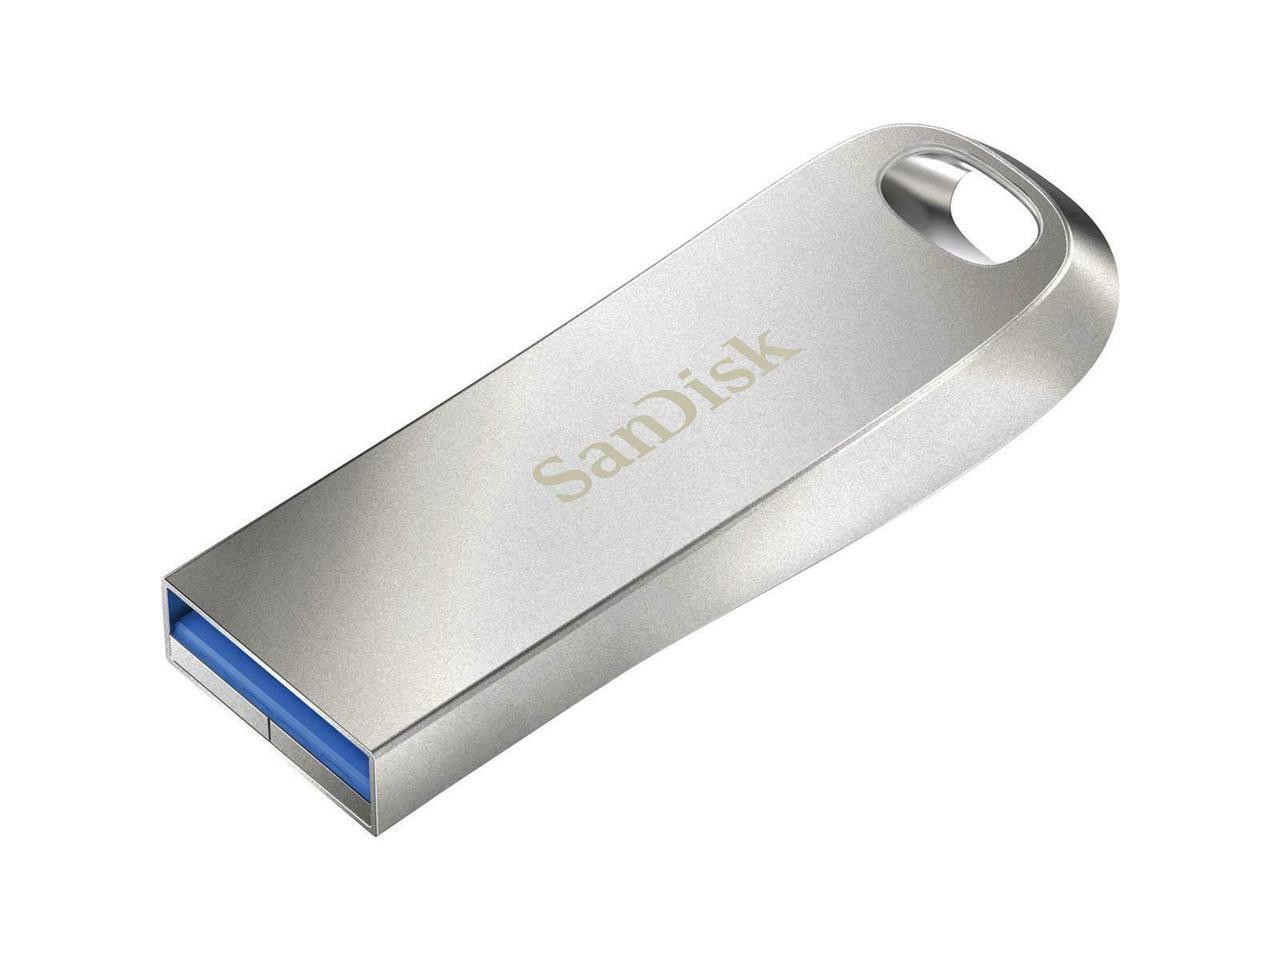 SanDisk 128GB Ultra Luxe USB 3.1 Full Metal Mobile Disk Drive